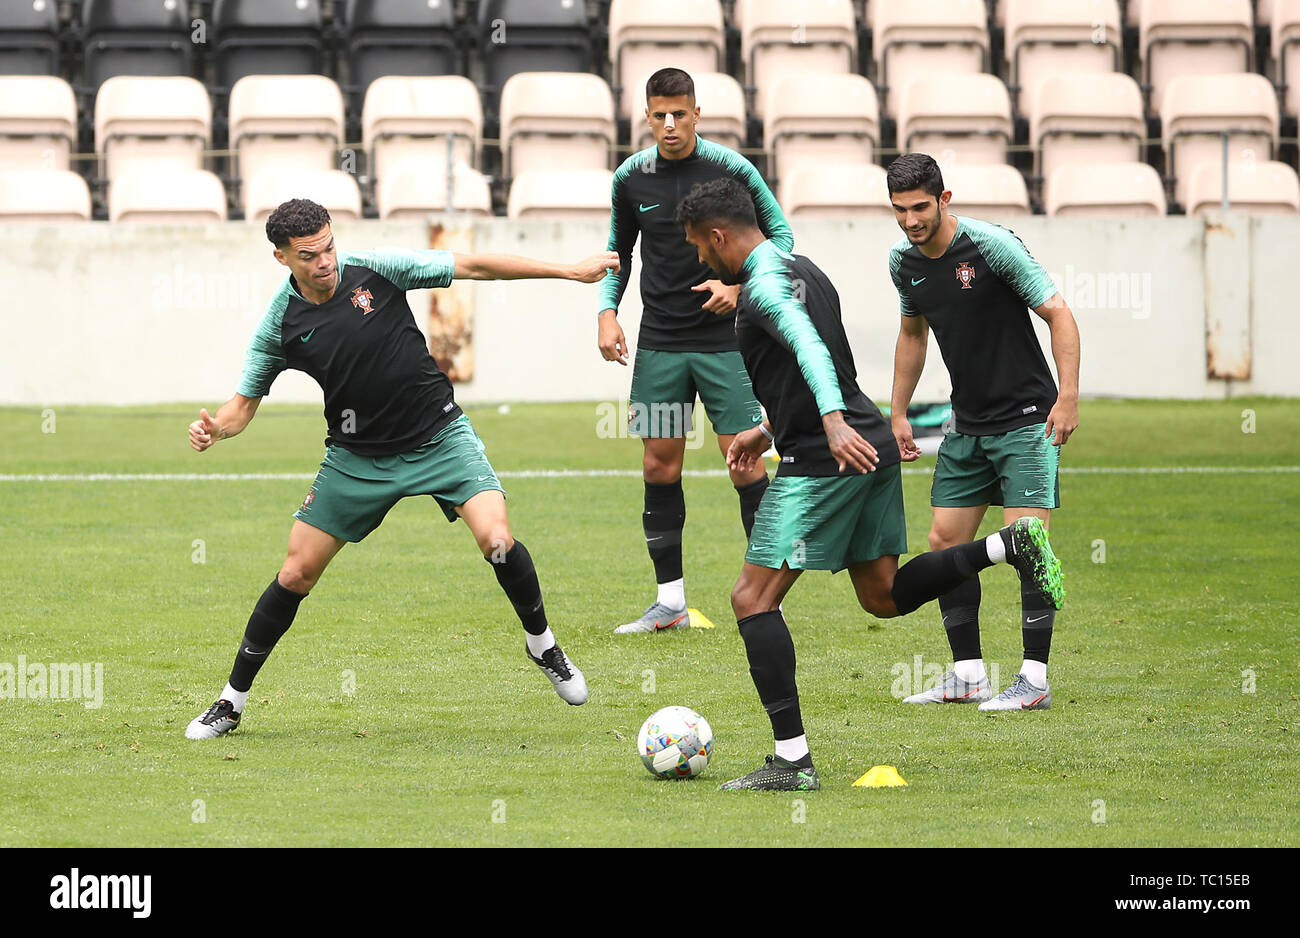 Portugal's Pepe (left) and Dyego Sousa battle for the ball as Joao Cancelo (centre) and Goncalo Guedes (right) watches on during the training session at Estadio do Bessa, Porto. Stock Photo